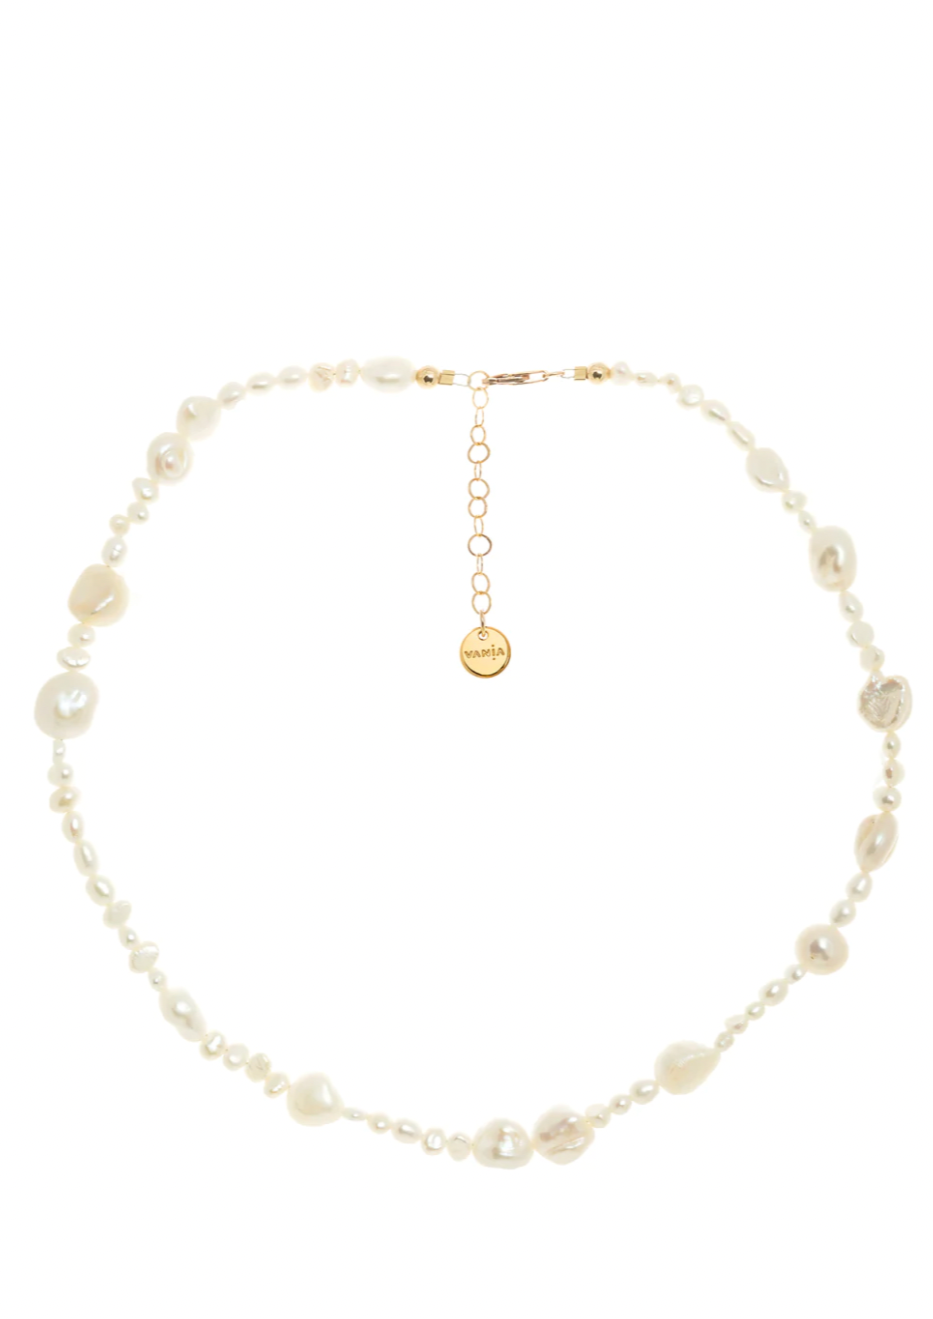 Margarita Paraguachi Necklace Named after one my favourite Plaza (square) in Margarita Island back home in Venezuela. This playful necklace features an elegant mixture of Freshwater pearls in different shapes & sizes.